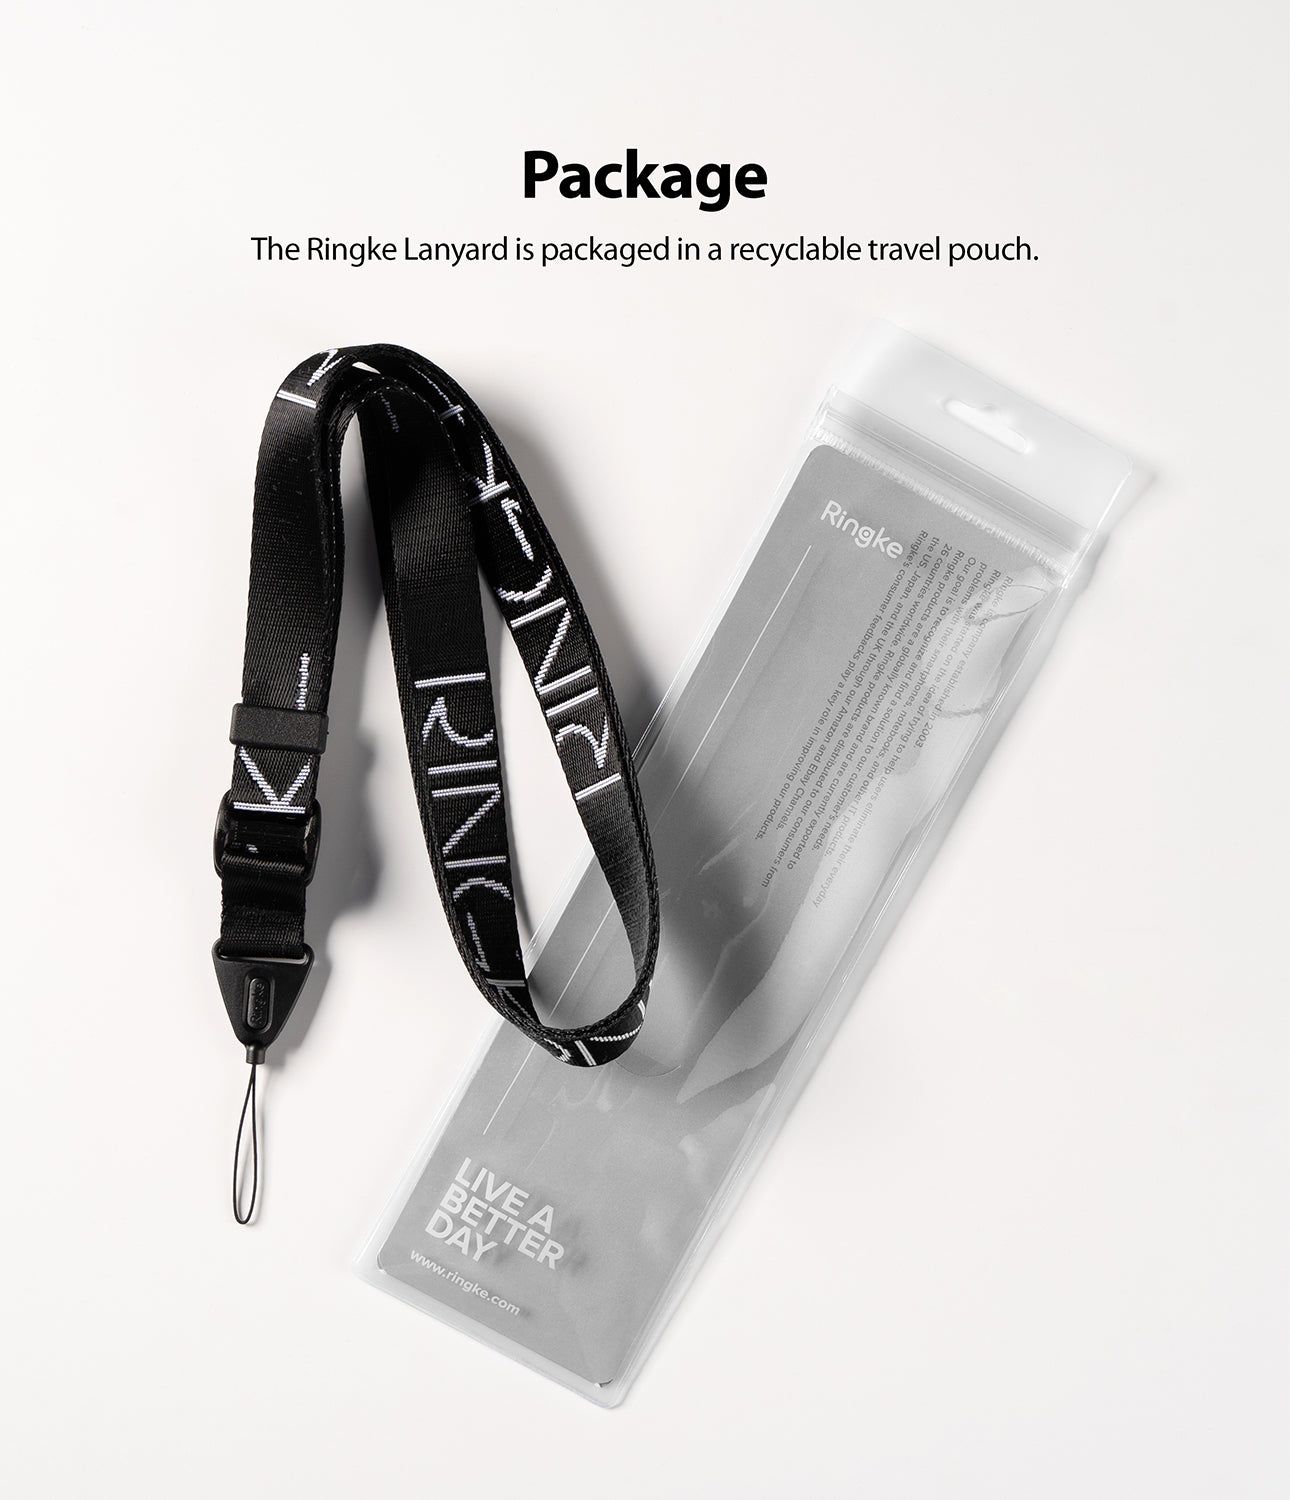 the ringke lanyard is packaged in a recyclable travel pouch